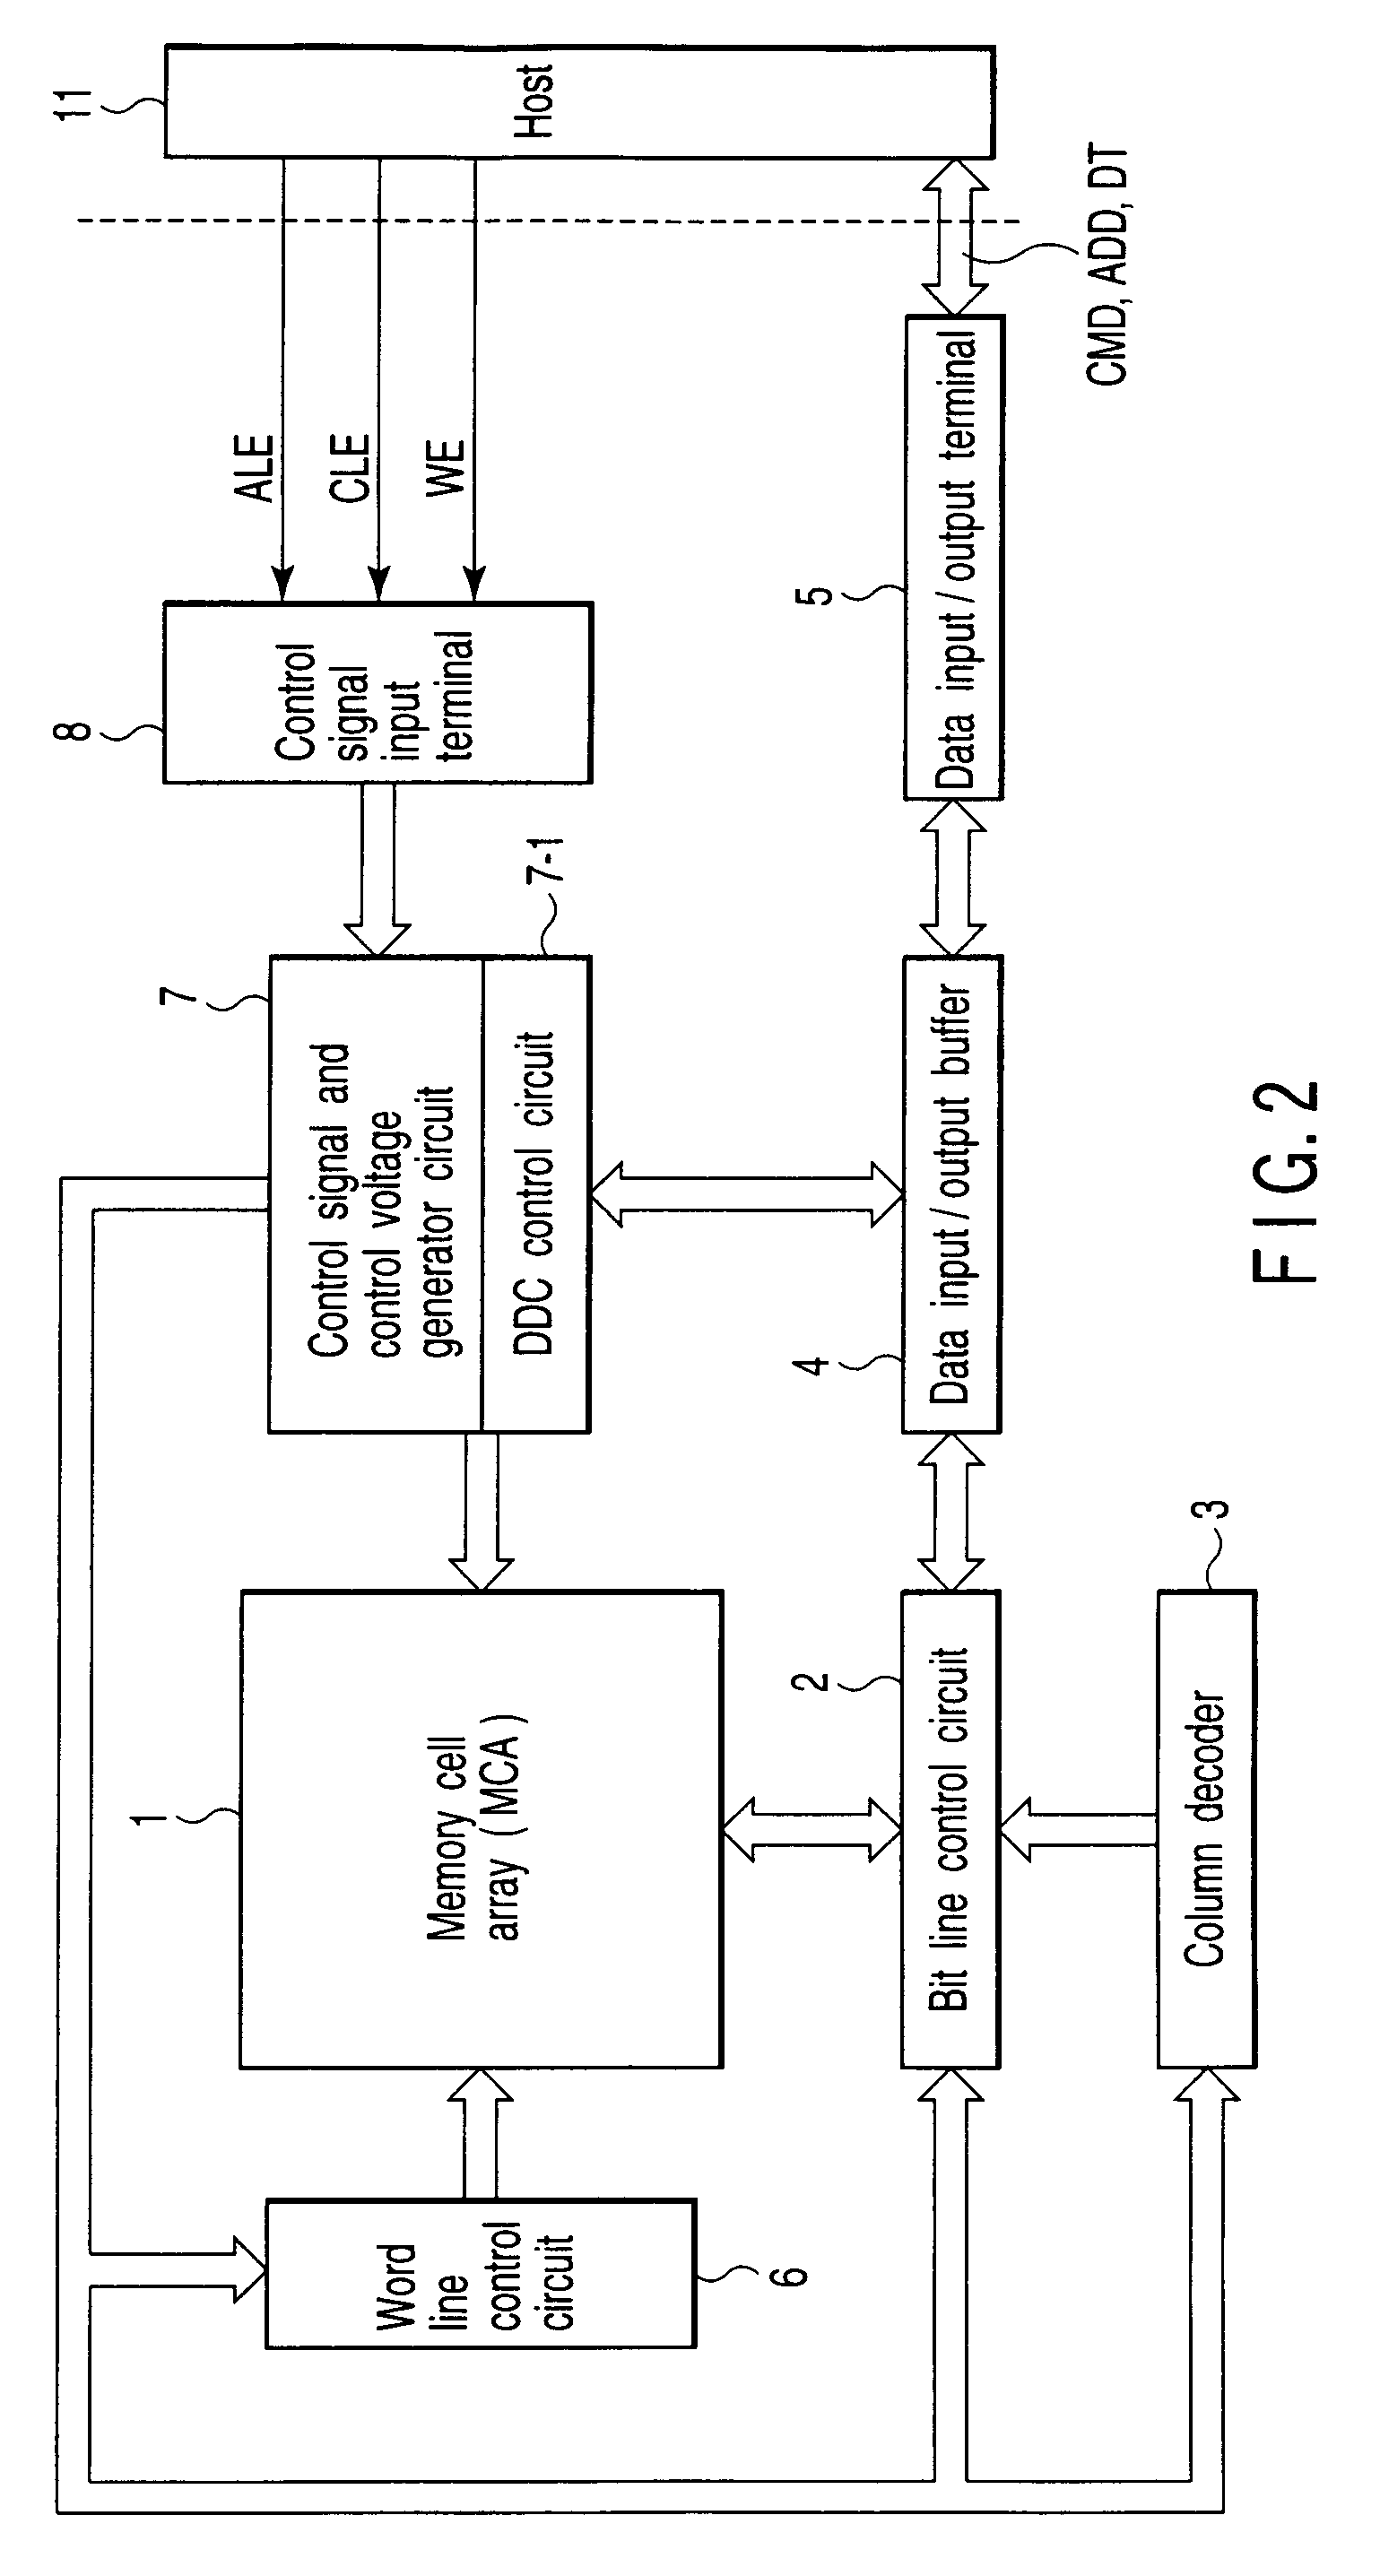 Semiconductor memory device for storing multilevel data